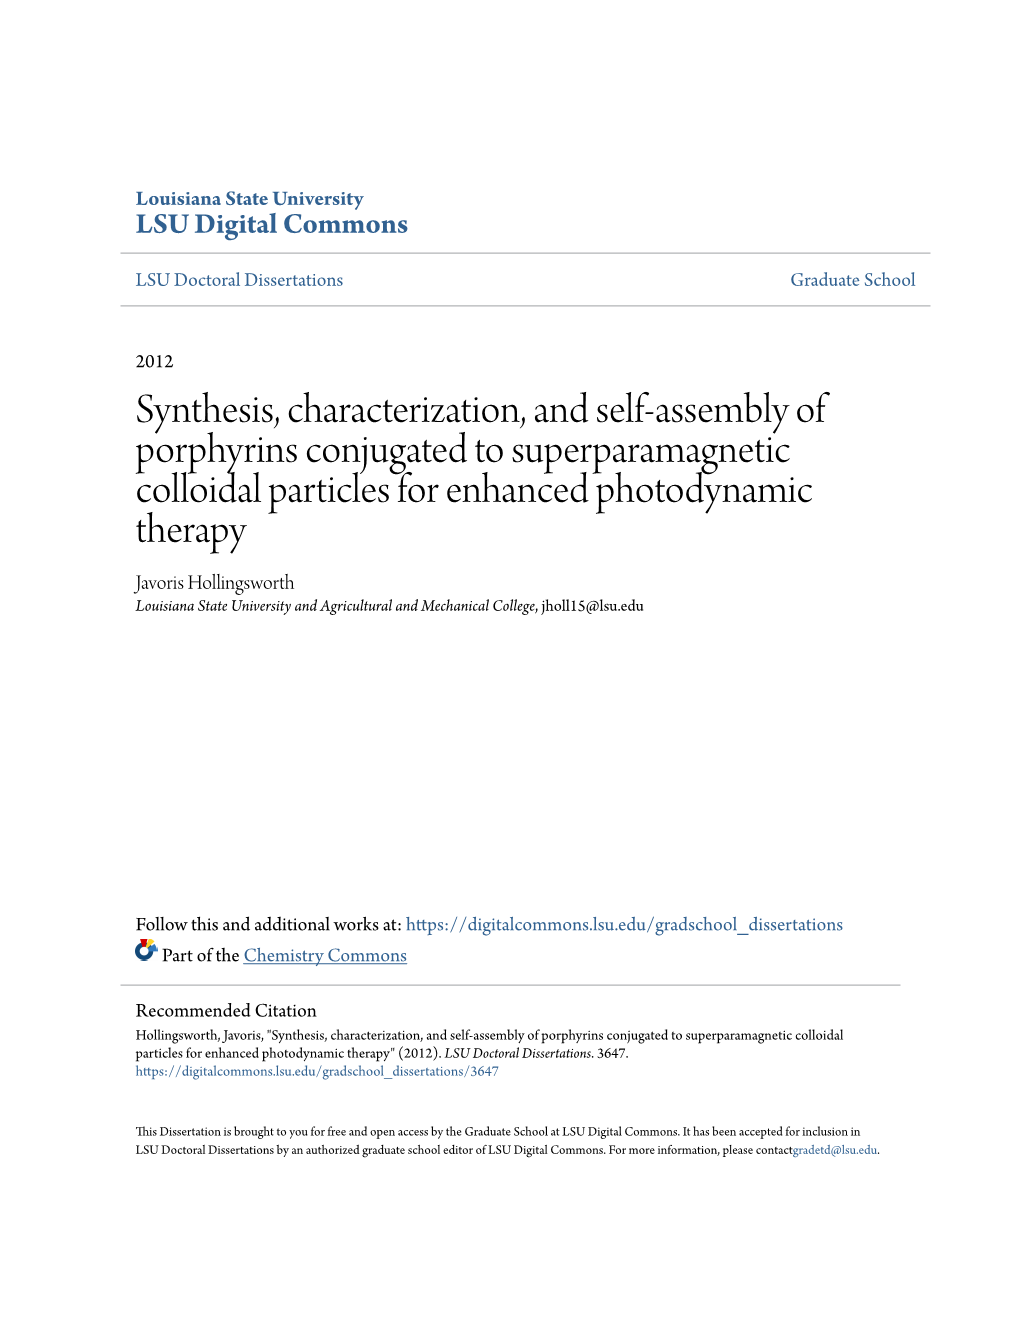 Synthesis, Characterization, and Self-Assembly of Porphyrins